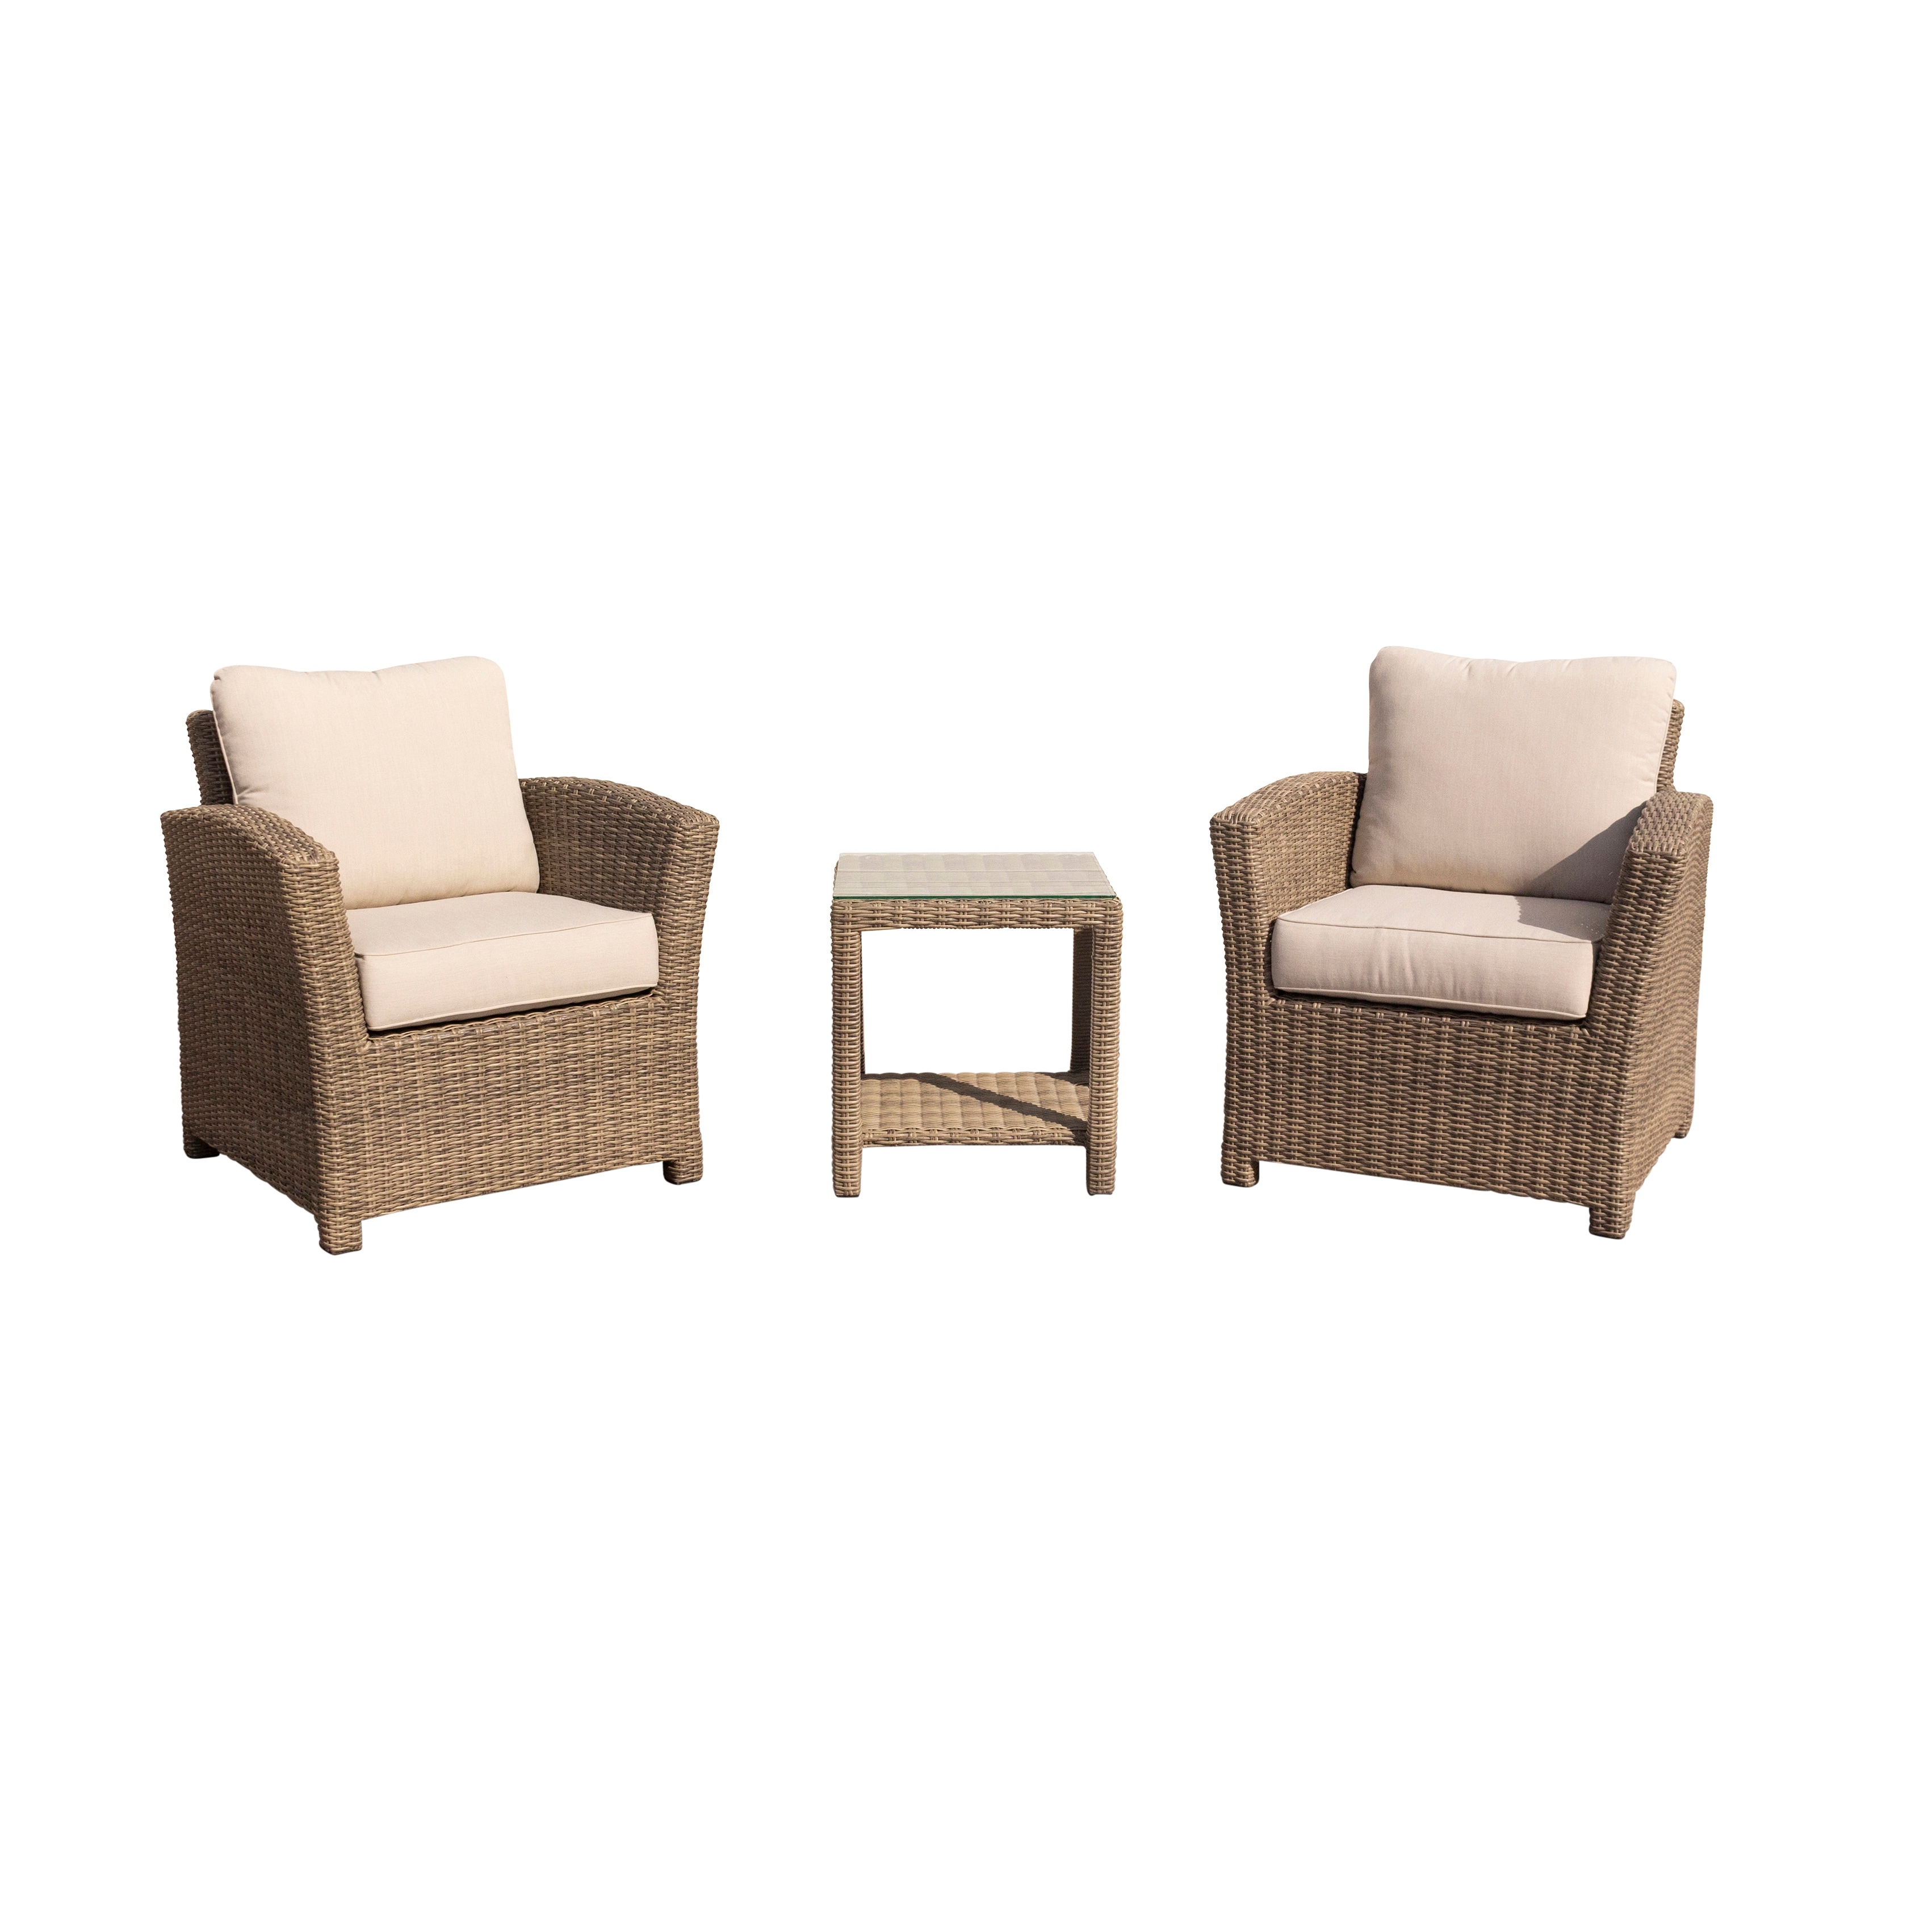 Courtyard Casual Capri 3 Pc Chat Set Includes: One End Table And Two Club Chairs